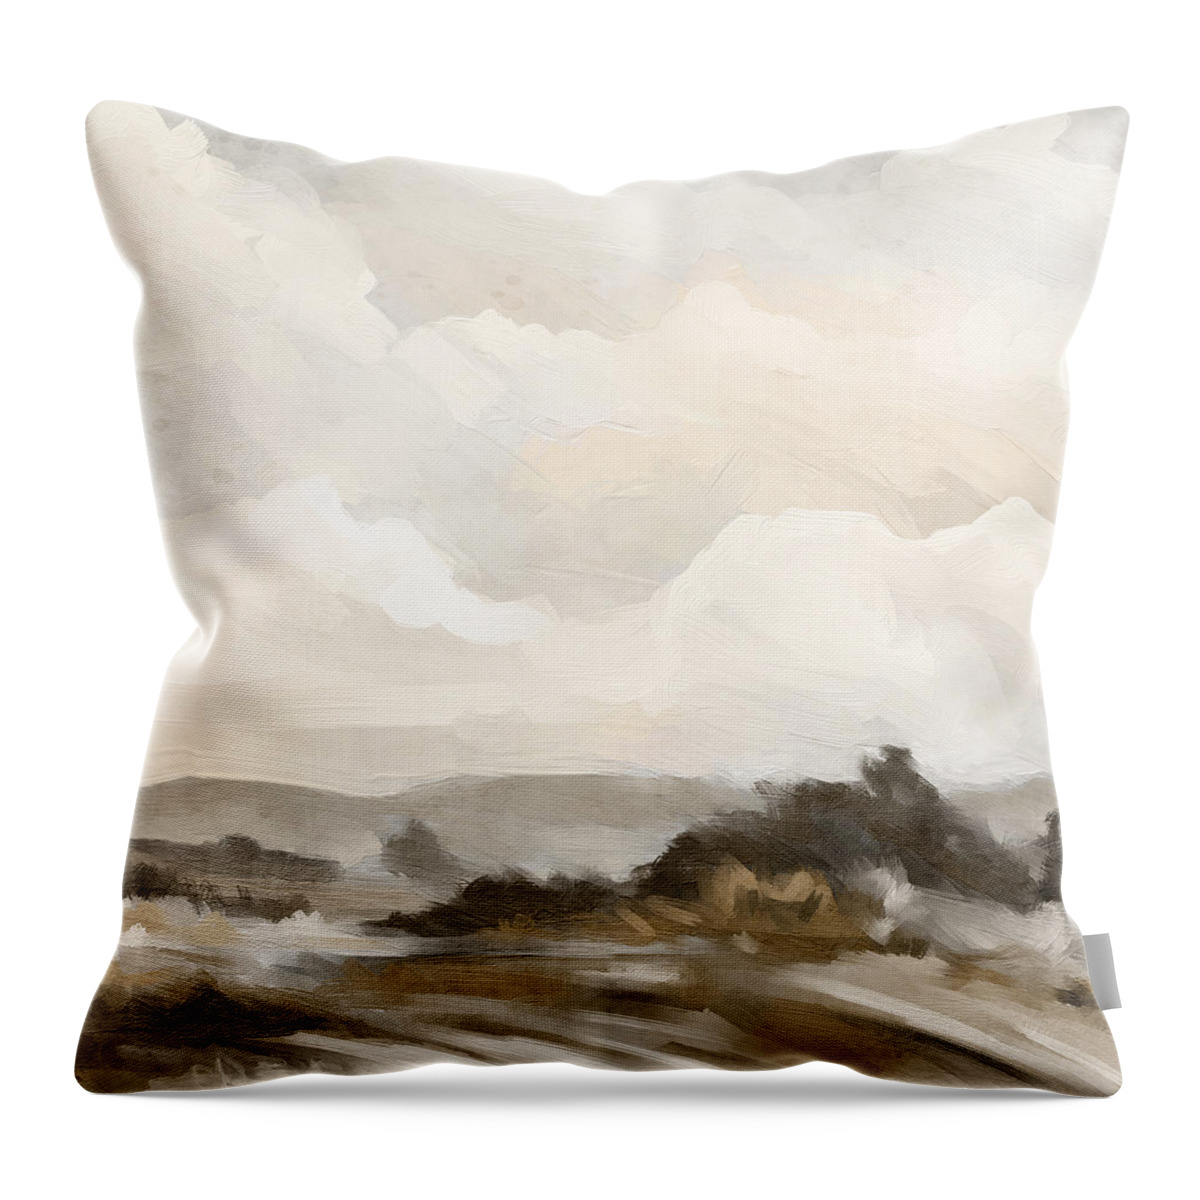 Abstract Throw Pillow featuring the digital art Landscape in Browns by Shawn Conn